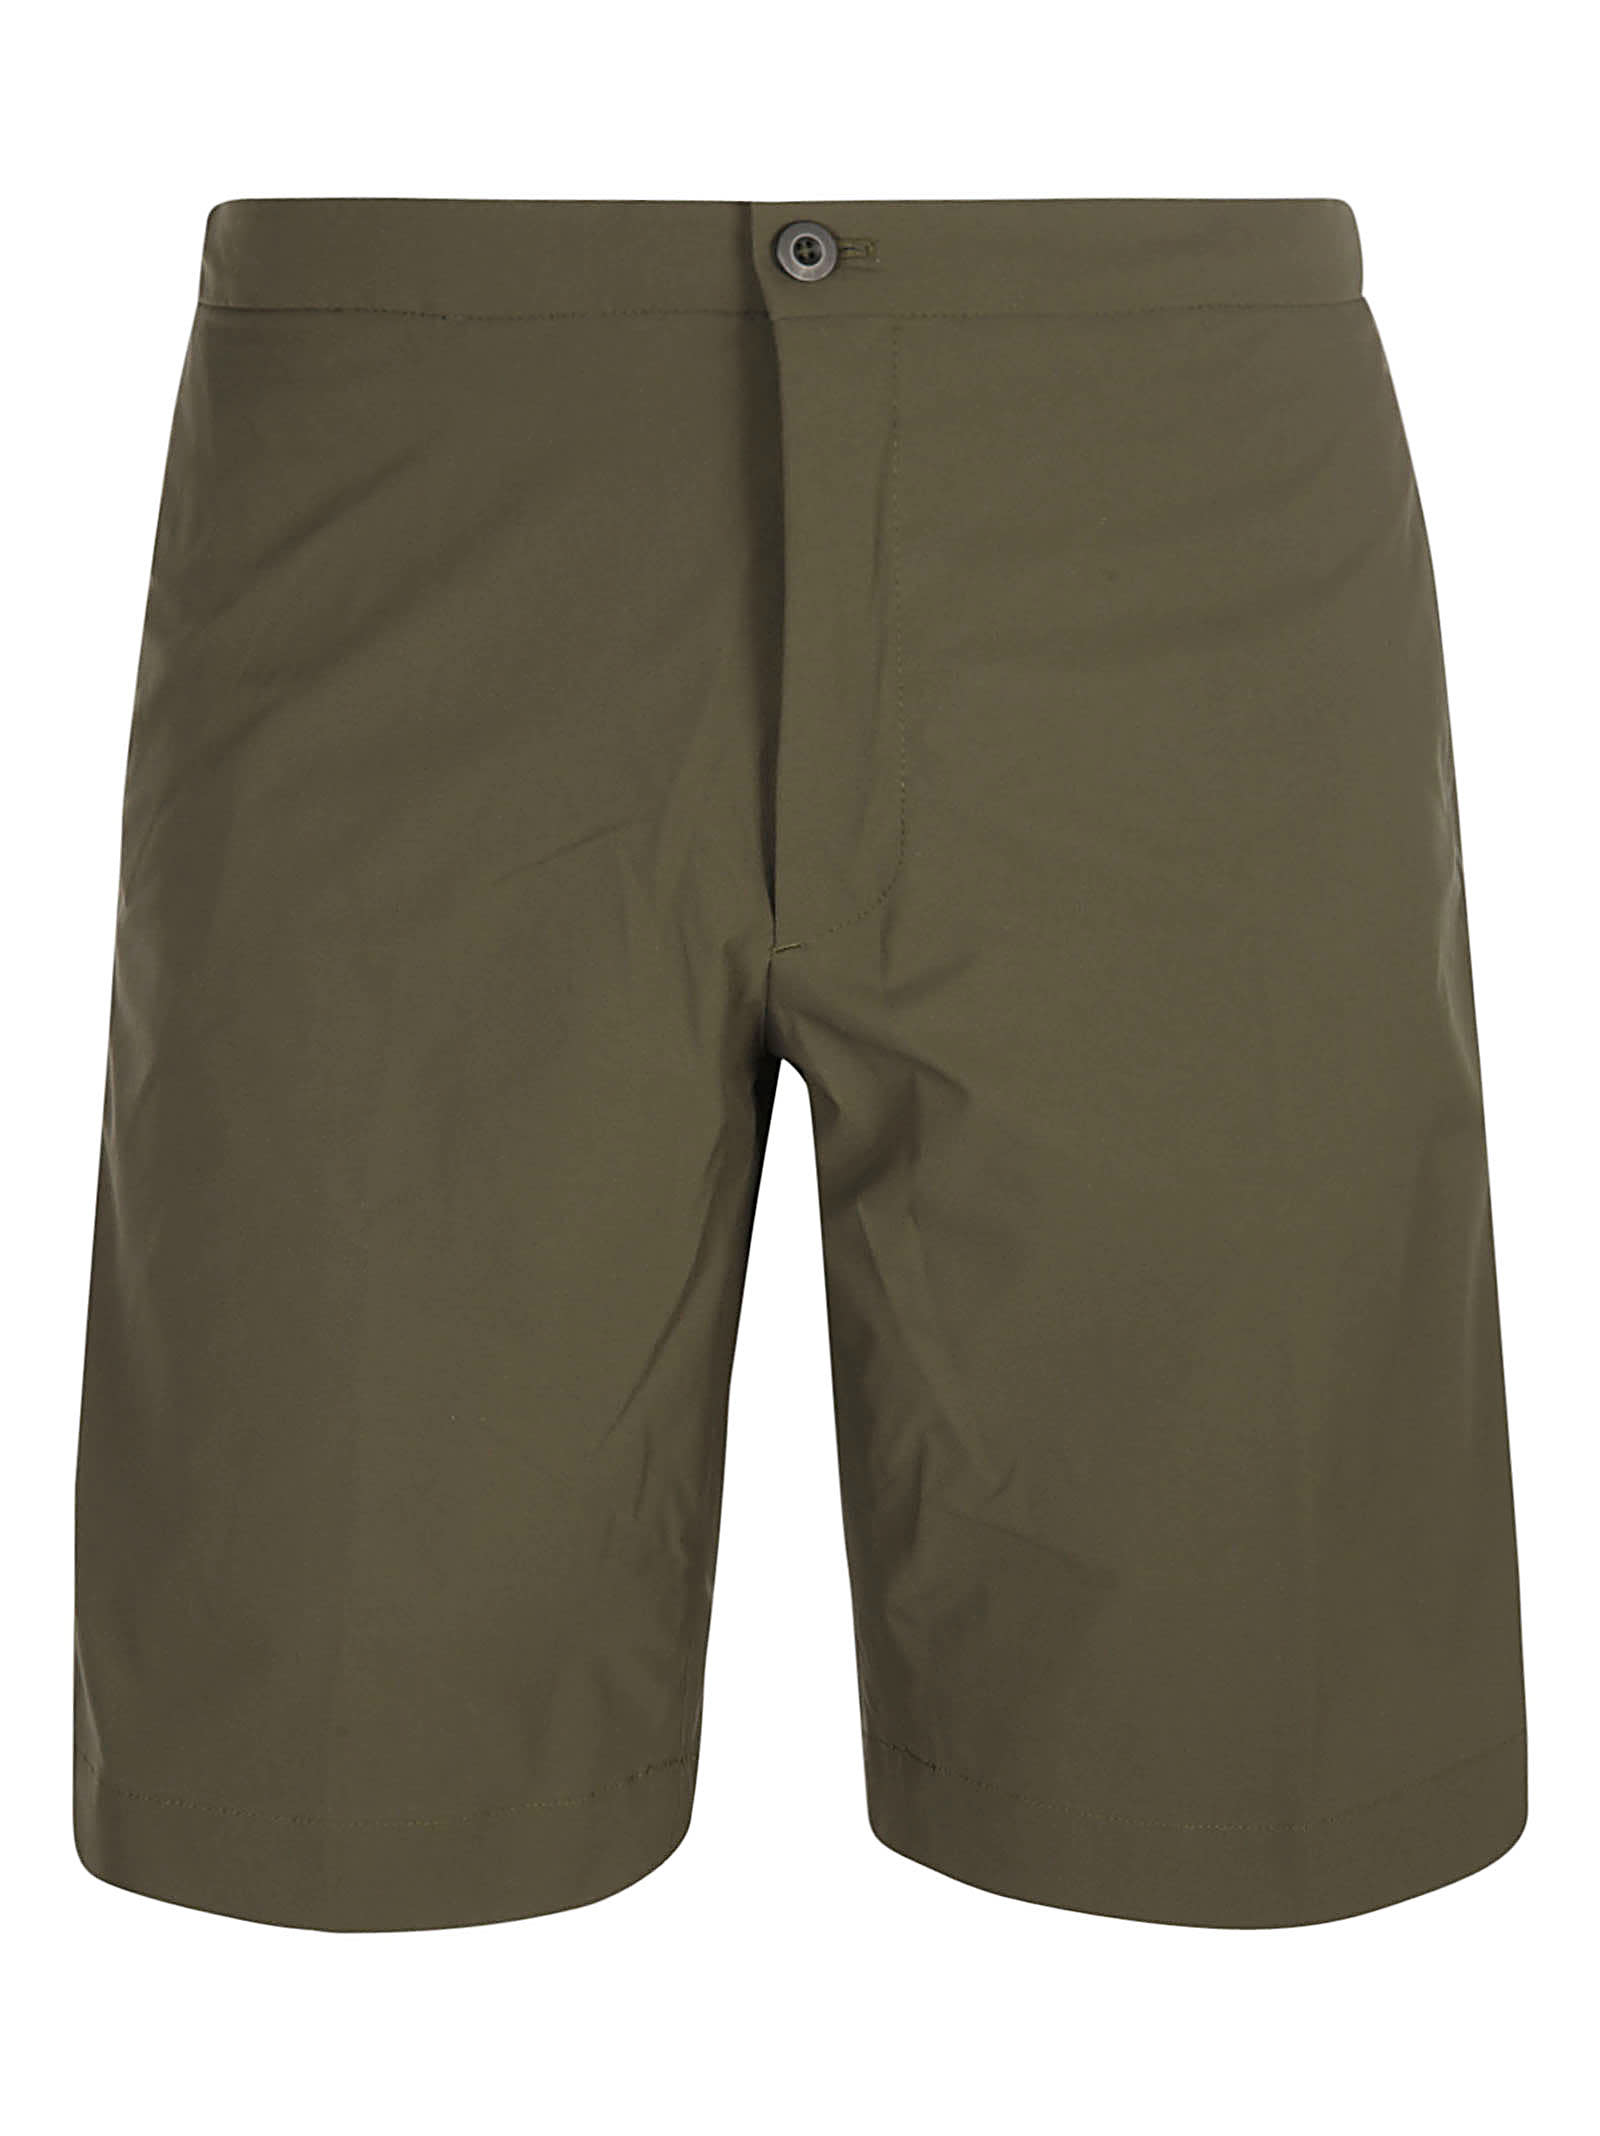 Incotex Buttoned Shorts